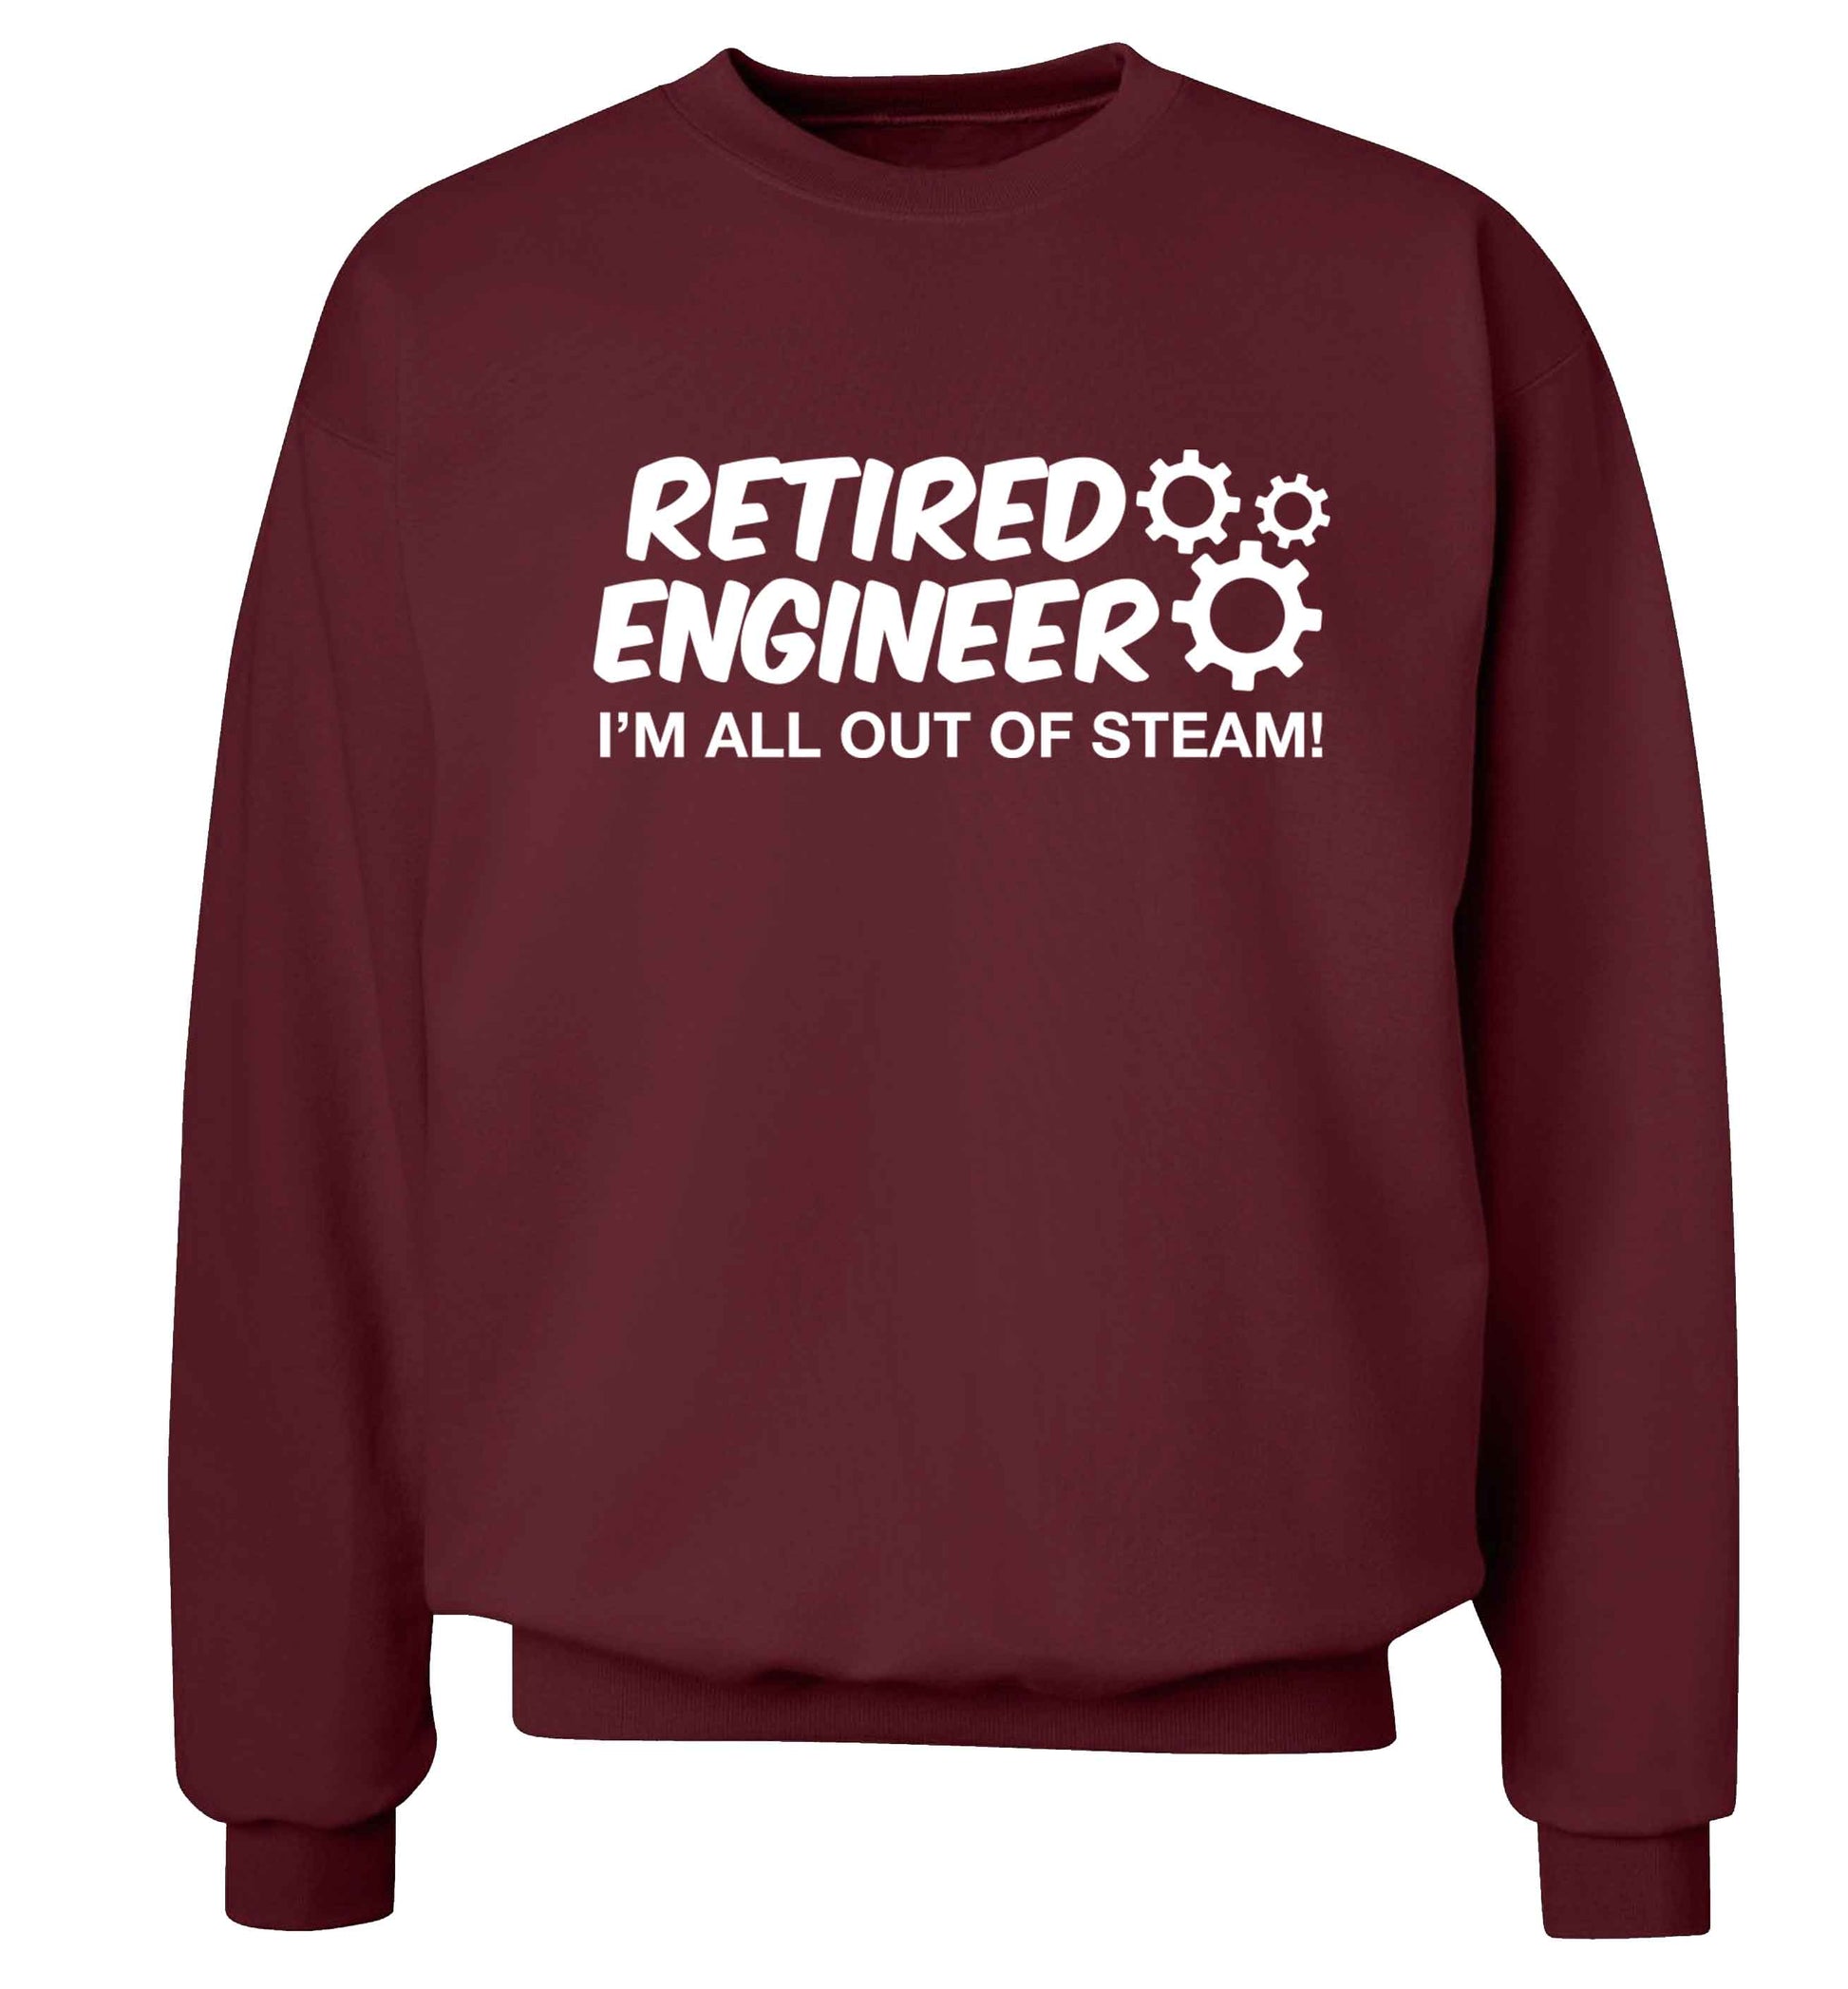 Retired engineer I'm all out of steam Adult's unisex maroon Sweater 2XL